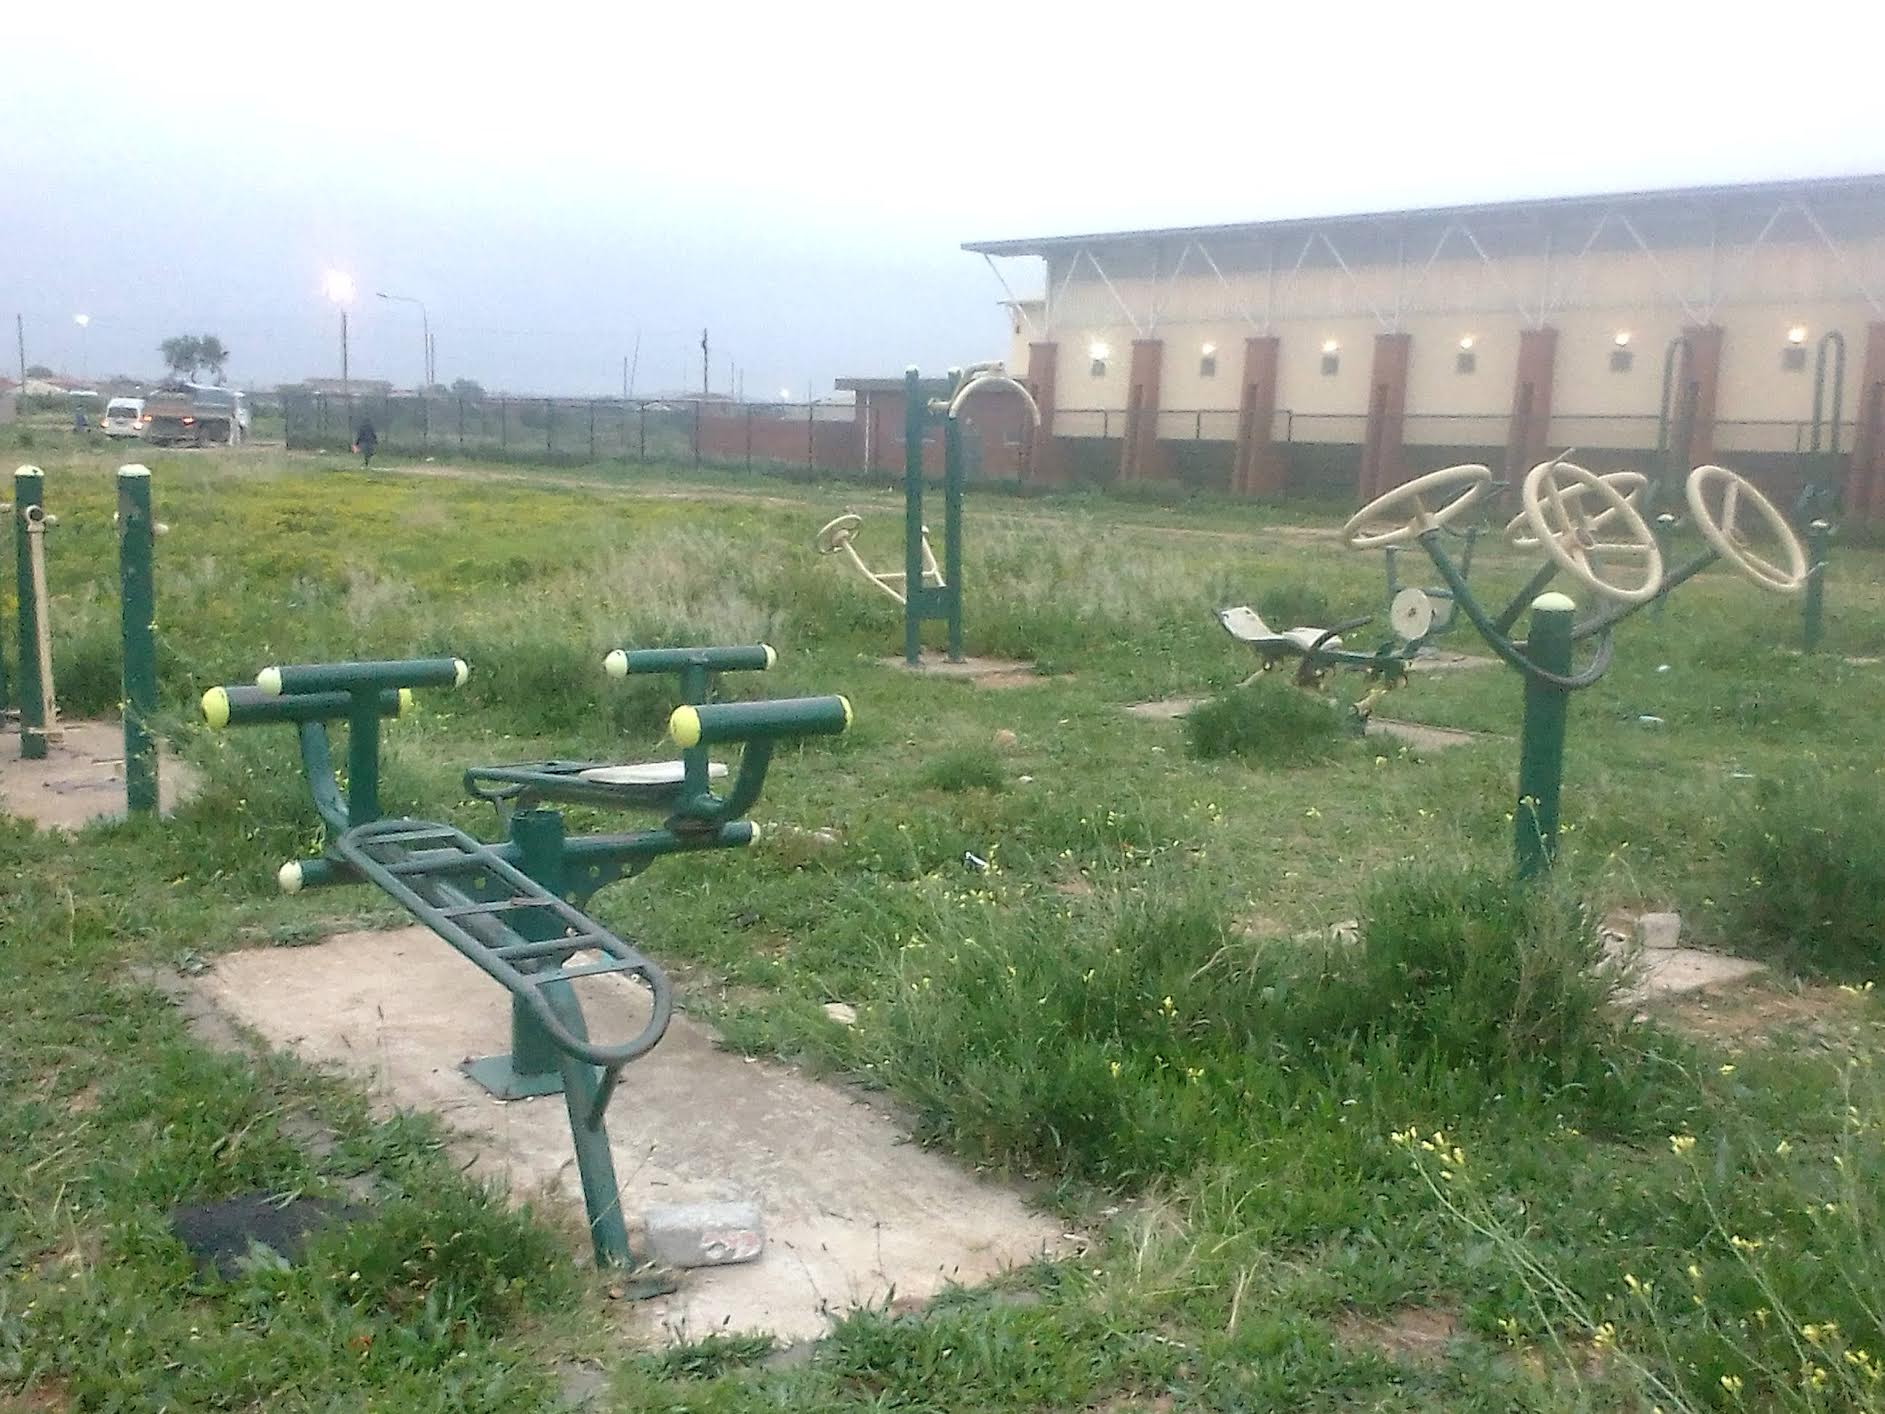 Public gymnasium often used in shaping up summer bodies in Motherwell Township in Nelson Mandela Bay, Eastern Cape. Photo by Godfrey Sigwela